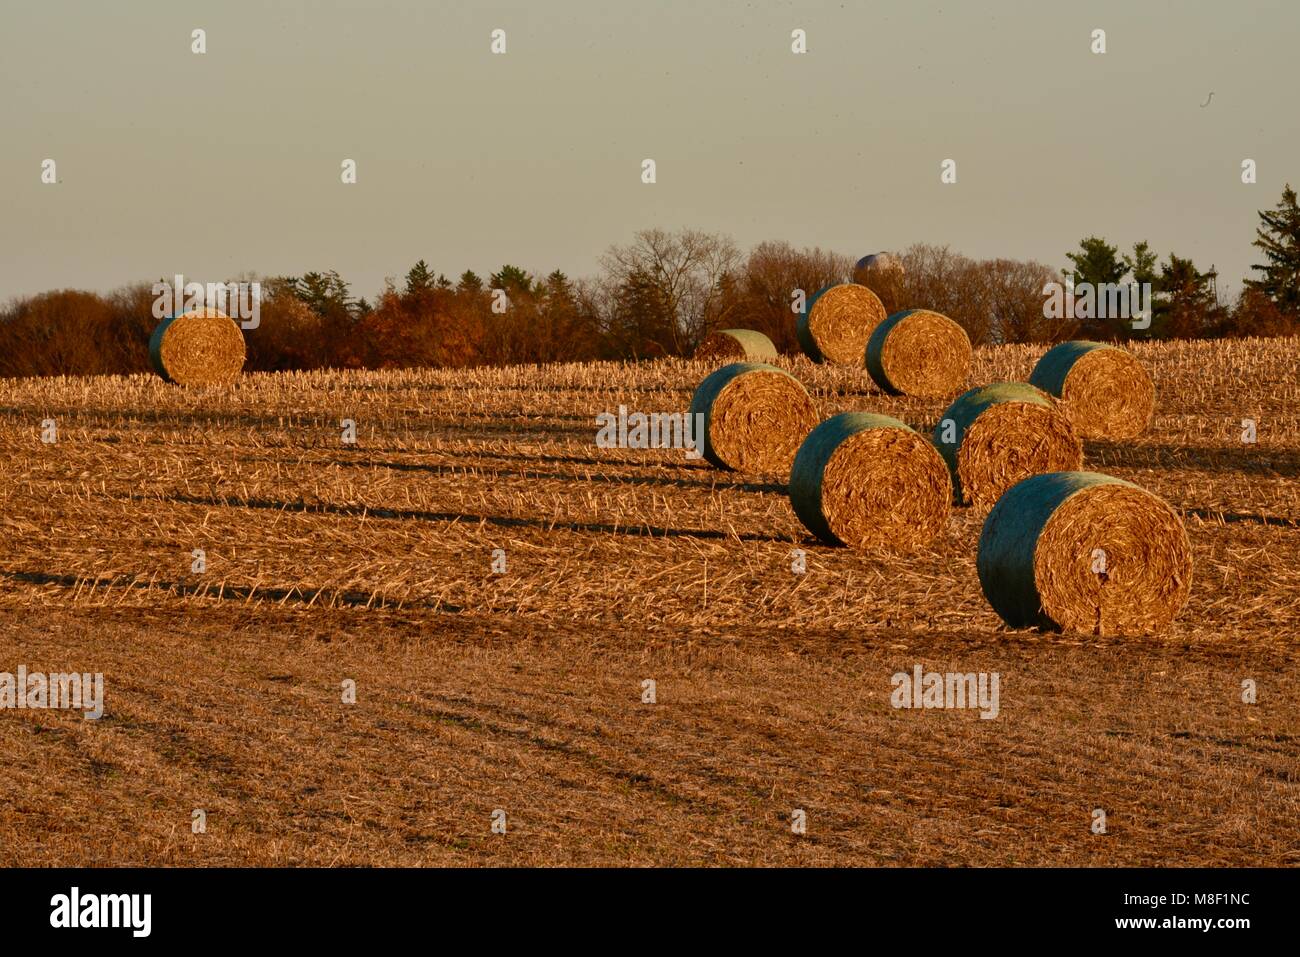 Large round bales of corn stalks, on fields of corn stubble, at golden sunset in the rural countryside outside Monroe, Wisconsin, USA Stock Photo